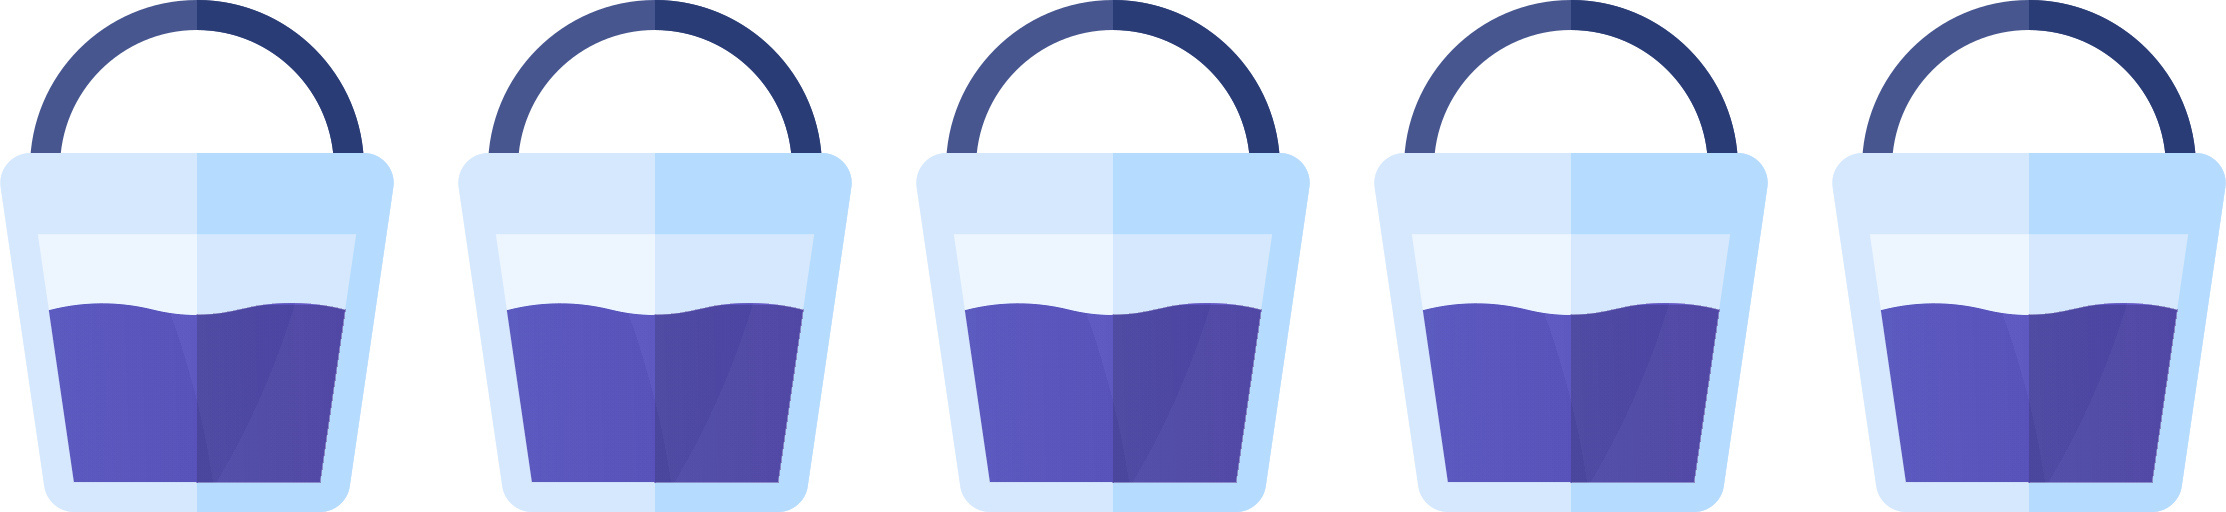 Example of buckets being full